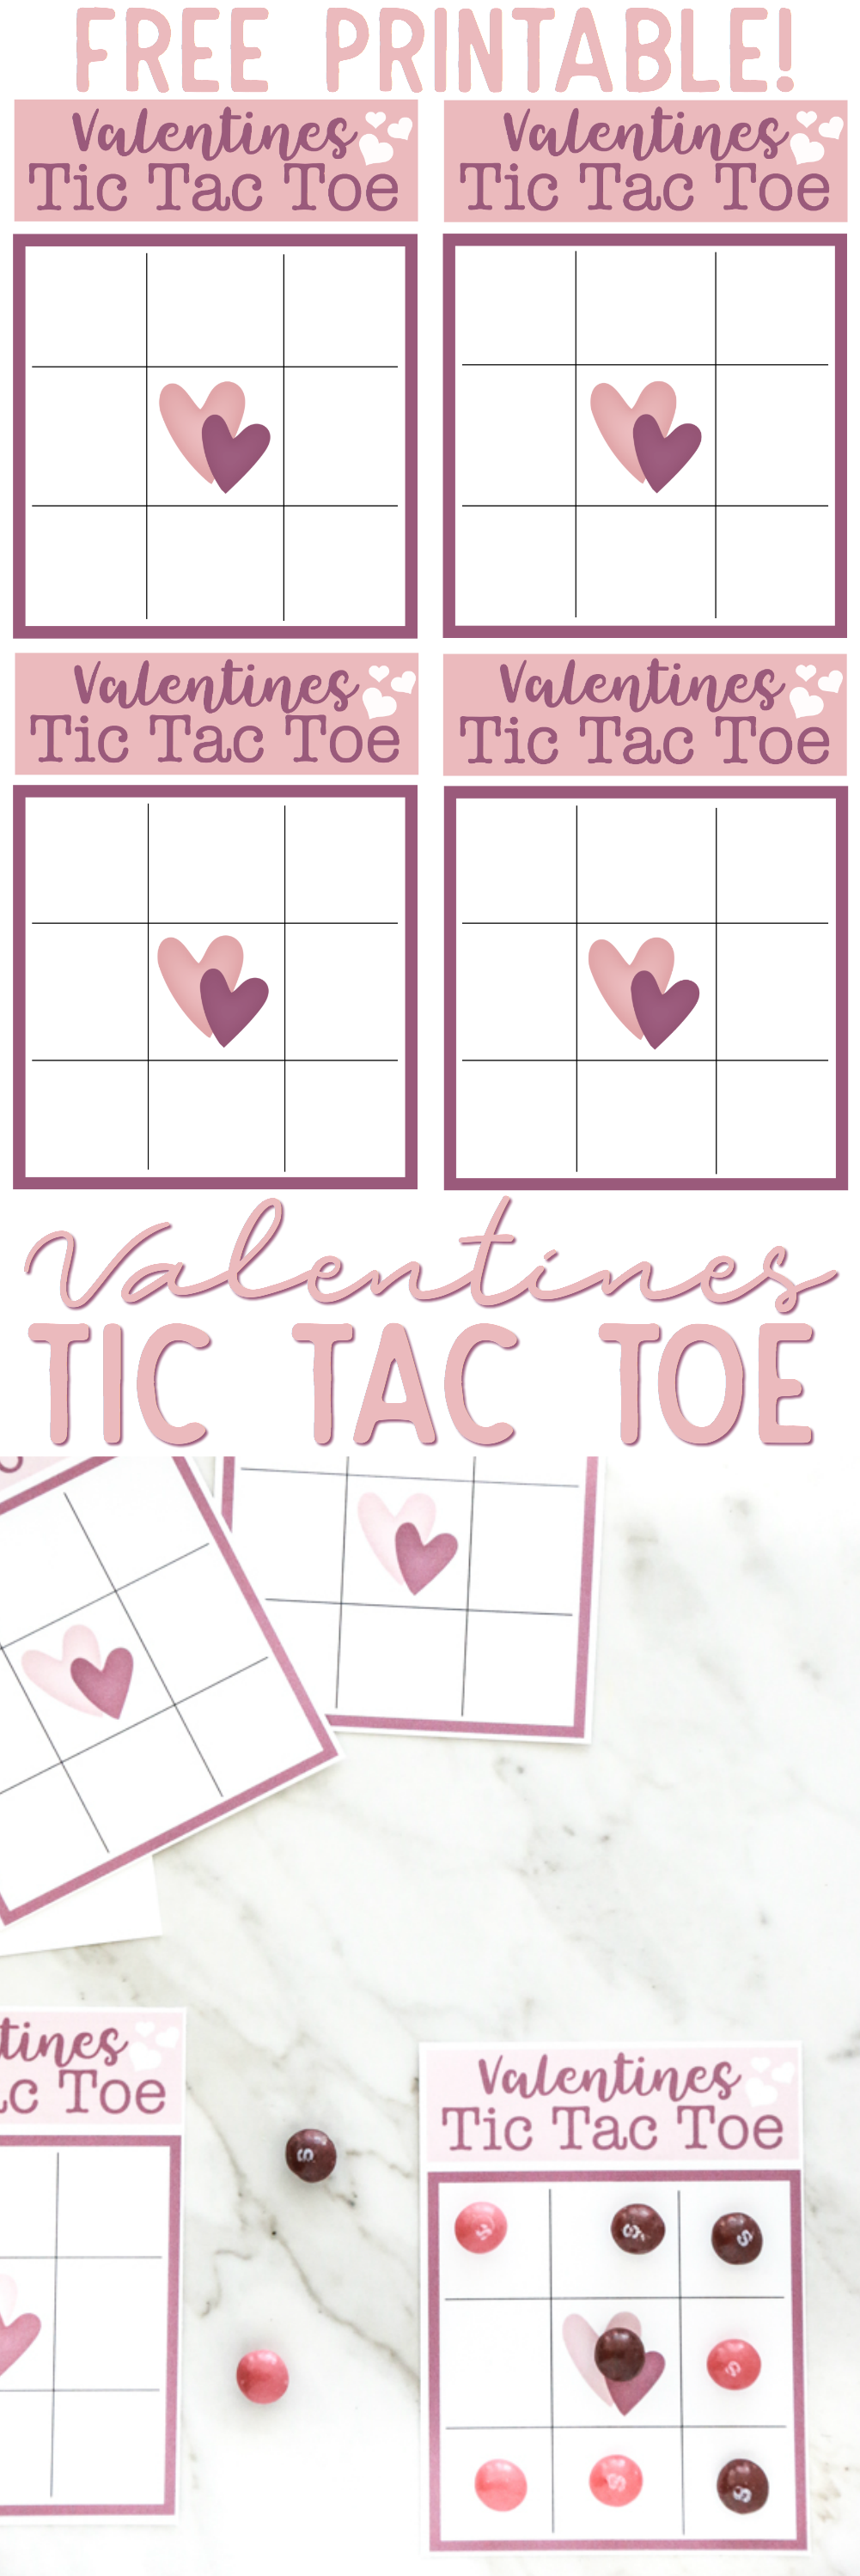 Challenge your friends and family to a fun game of Valentines Tic Tac Toe with this FREE Valentines Tic Tac Toe printable.